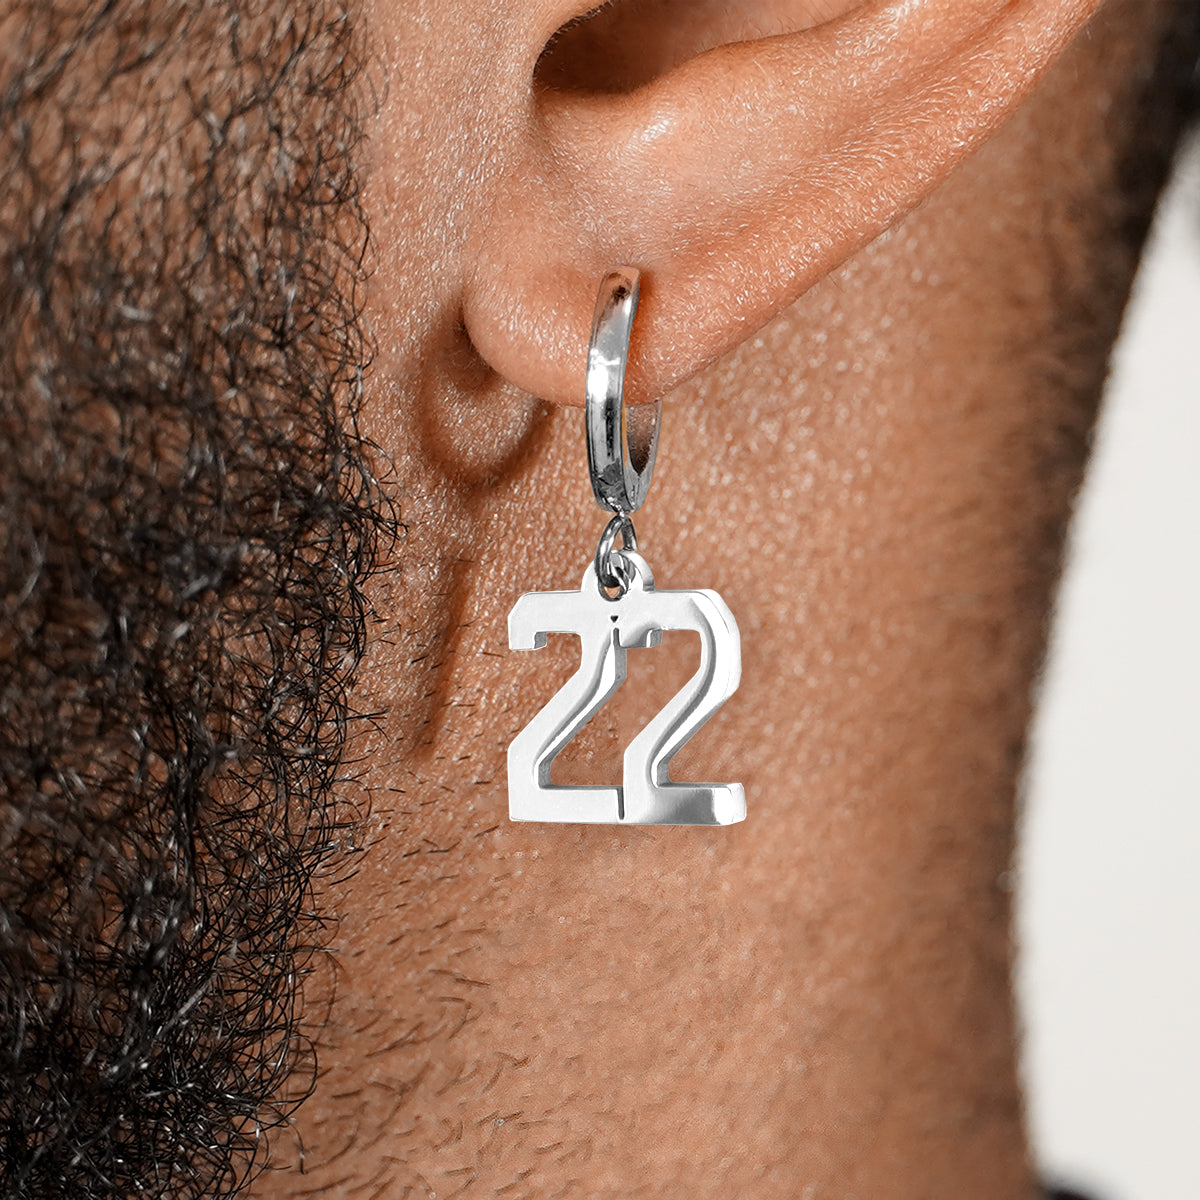 22 Number Earring - Stainless Steel